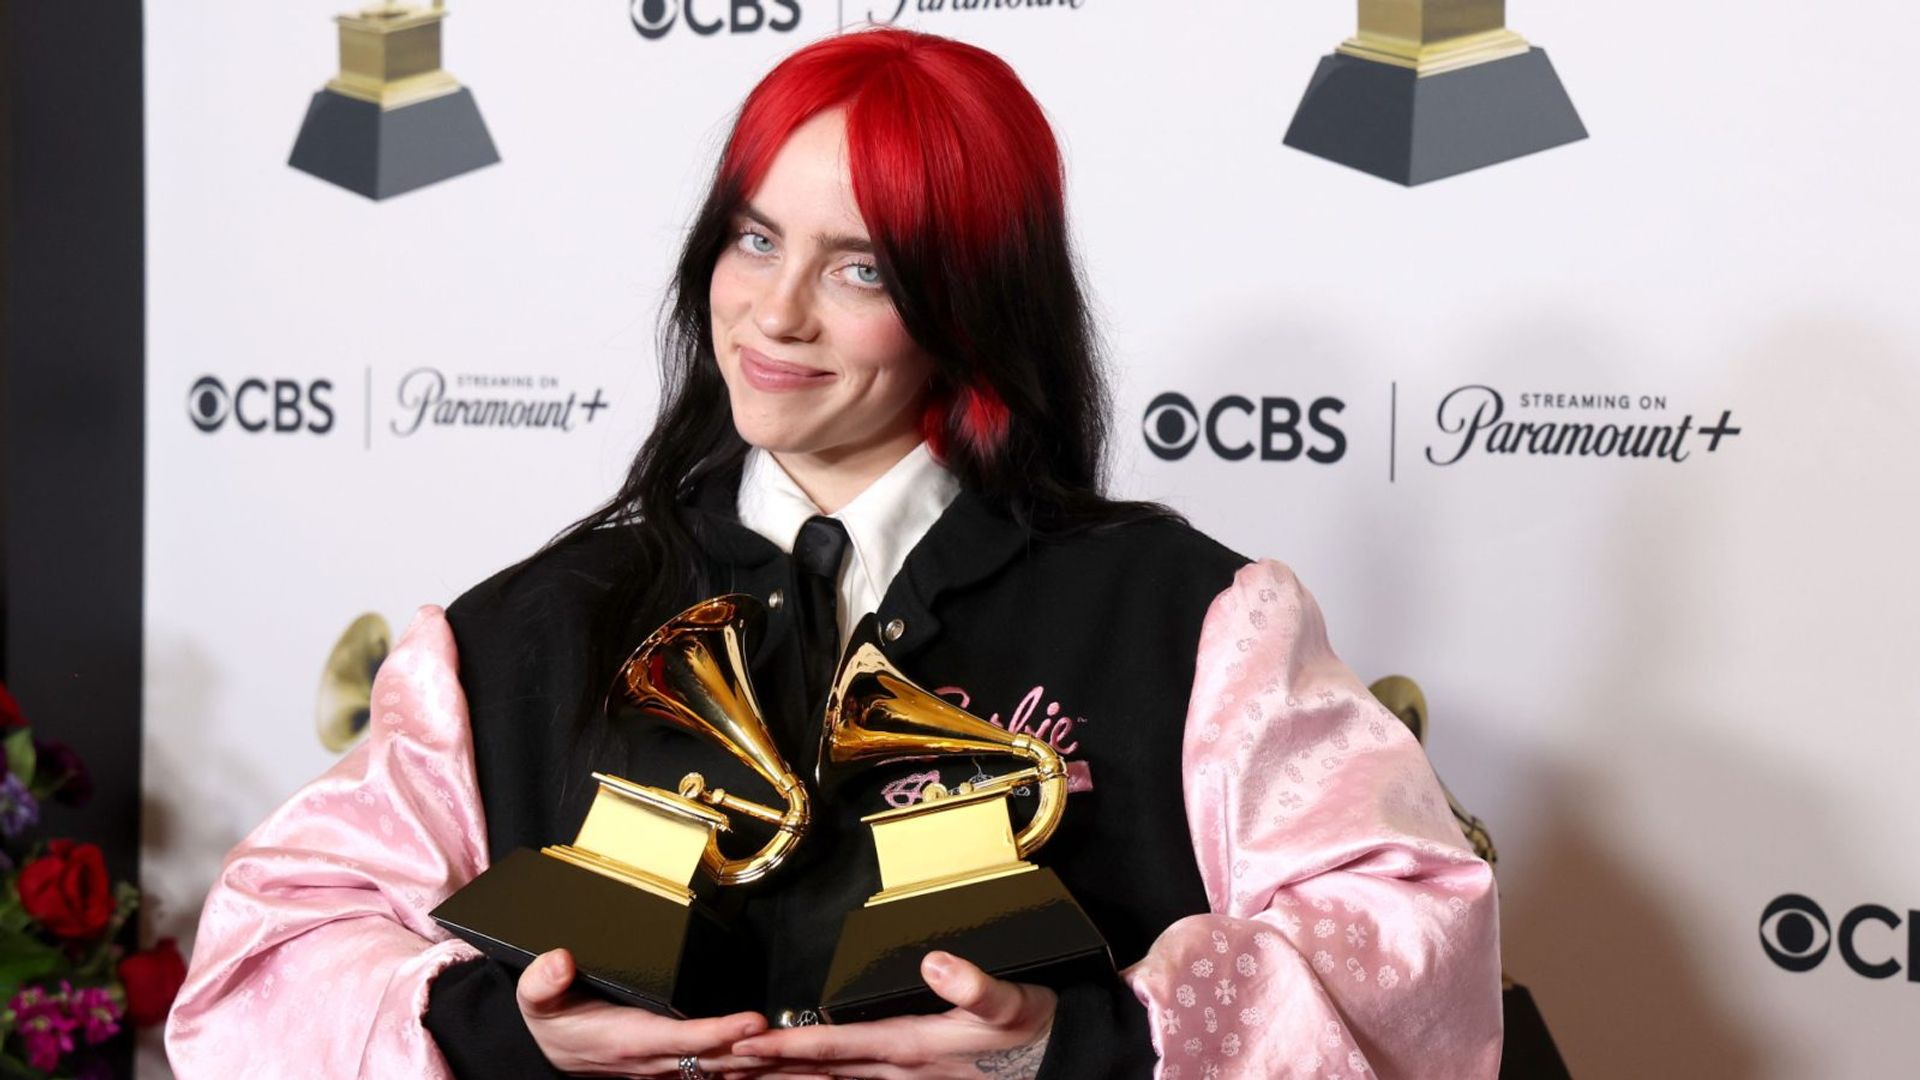 A Look at Billie Eilish's net worth, dating history, and Grammy wins